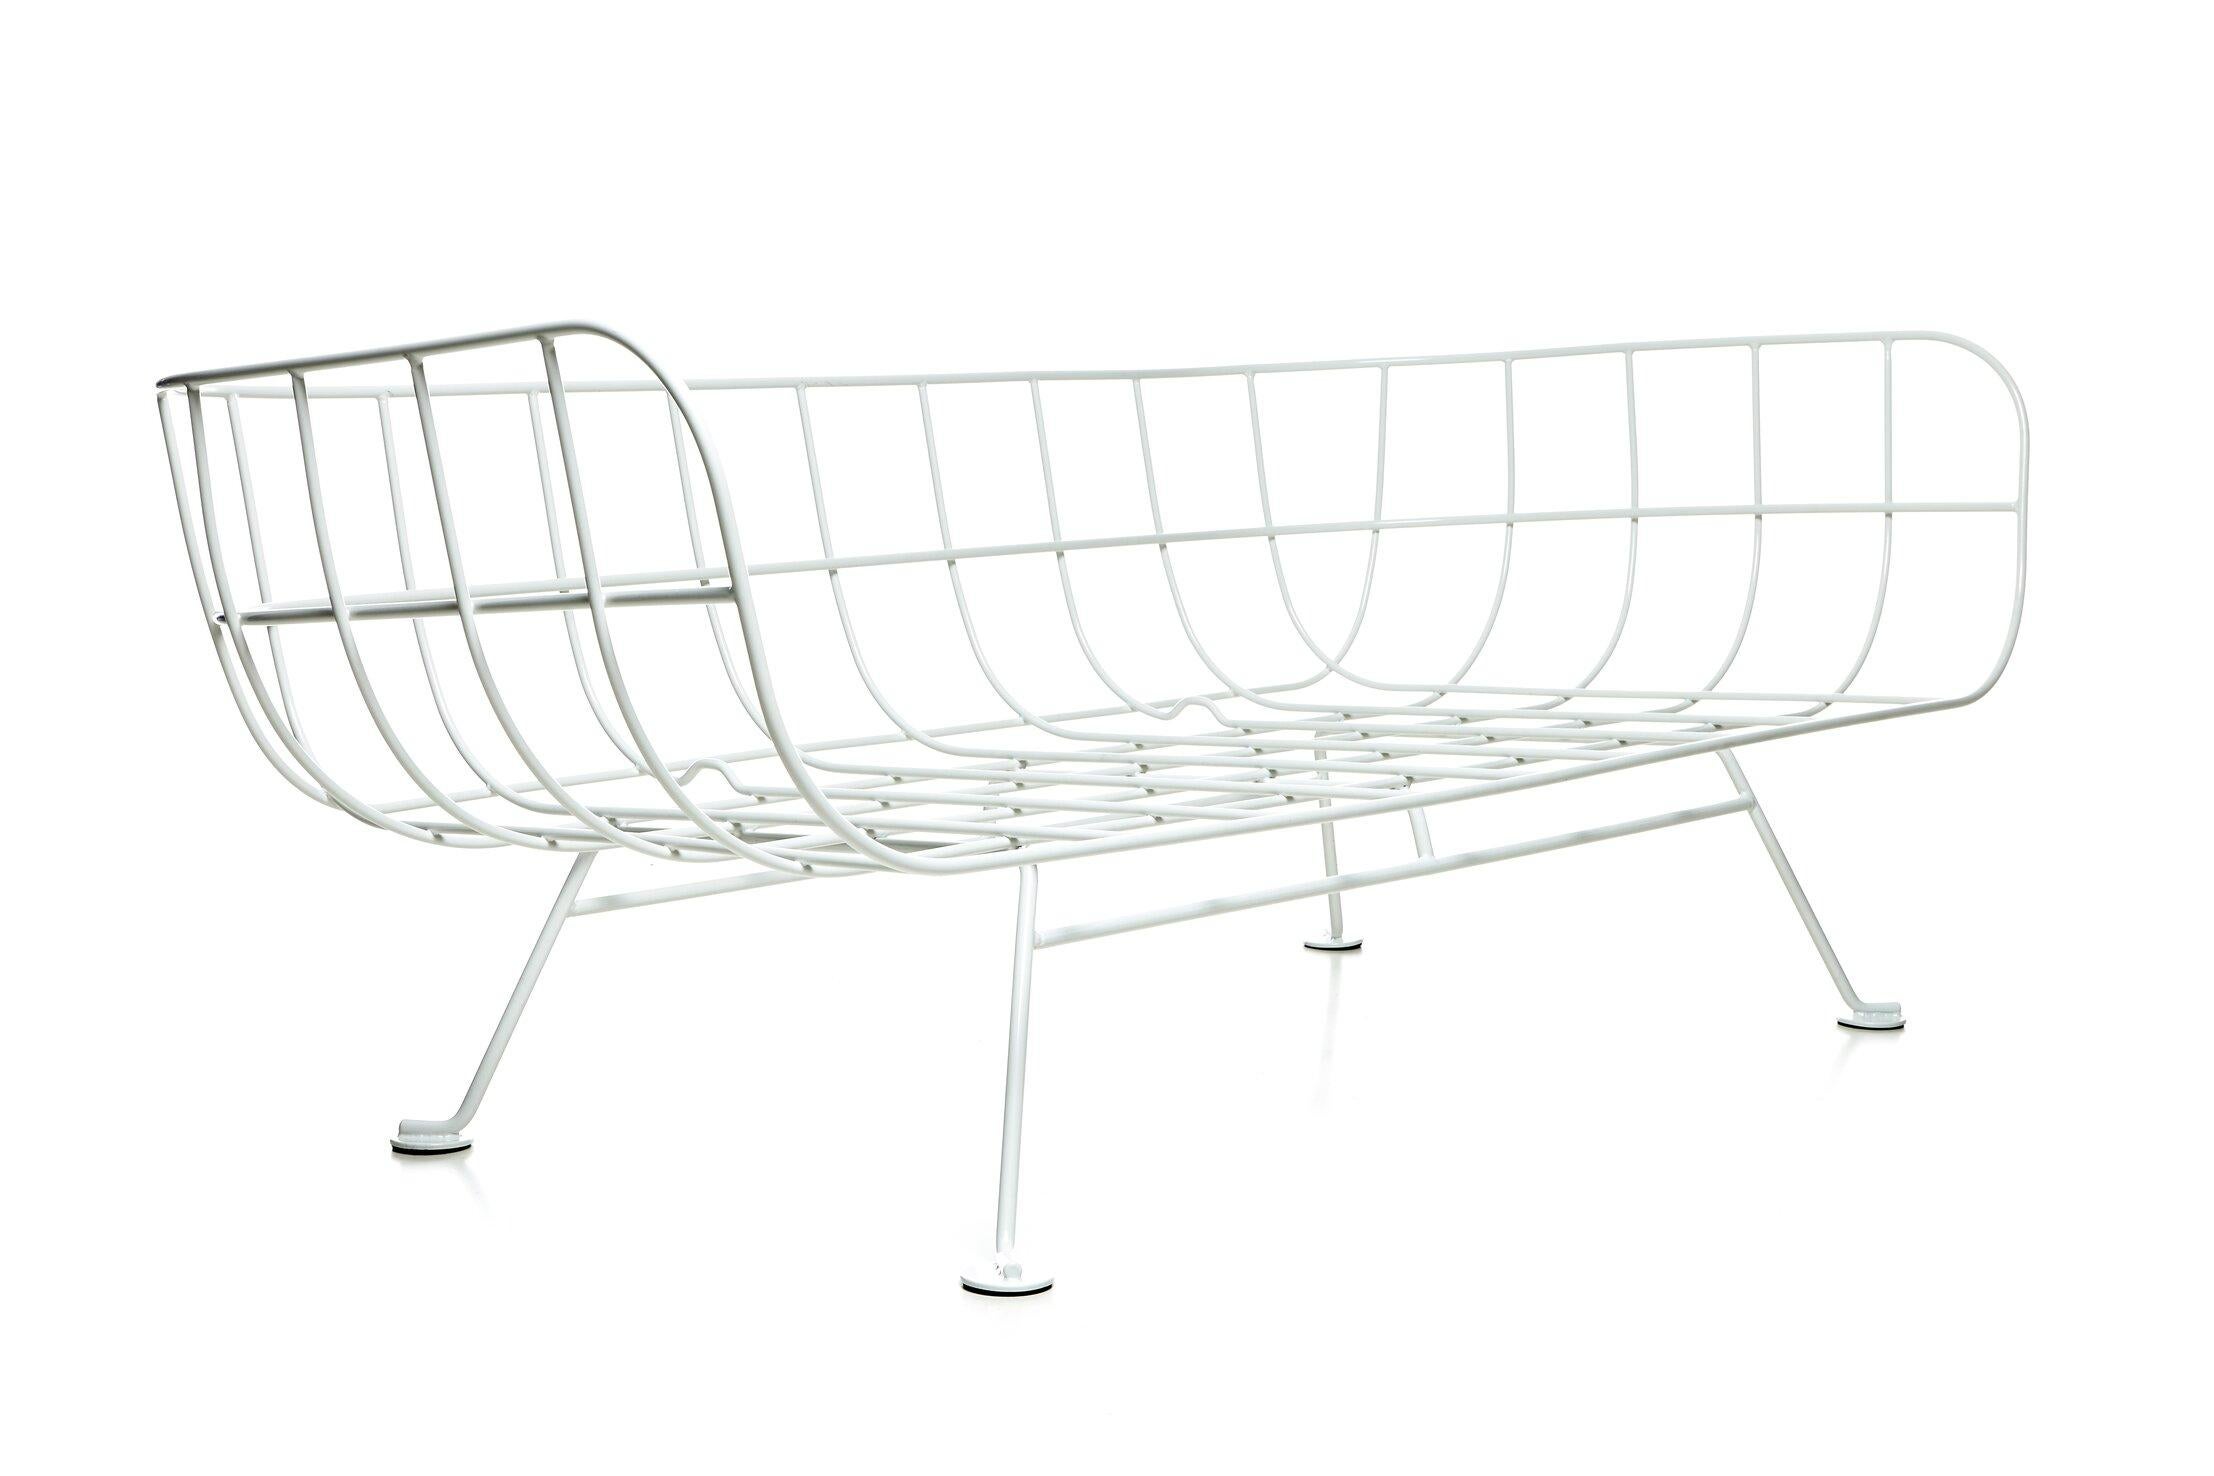 Dutch Moooi Nest Double Seater Sofa in White Steel Frame by Marcel Wanders Studio For Sale